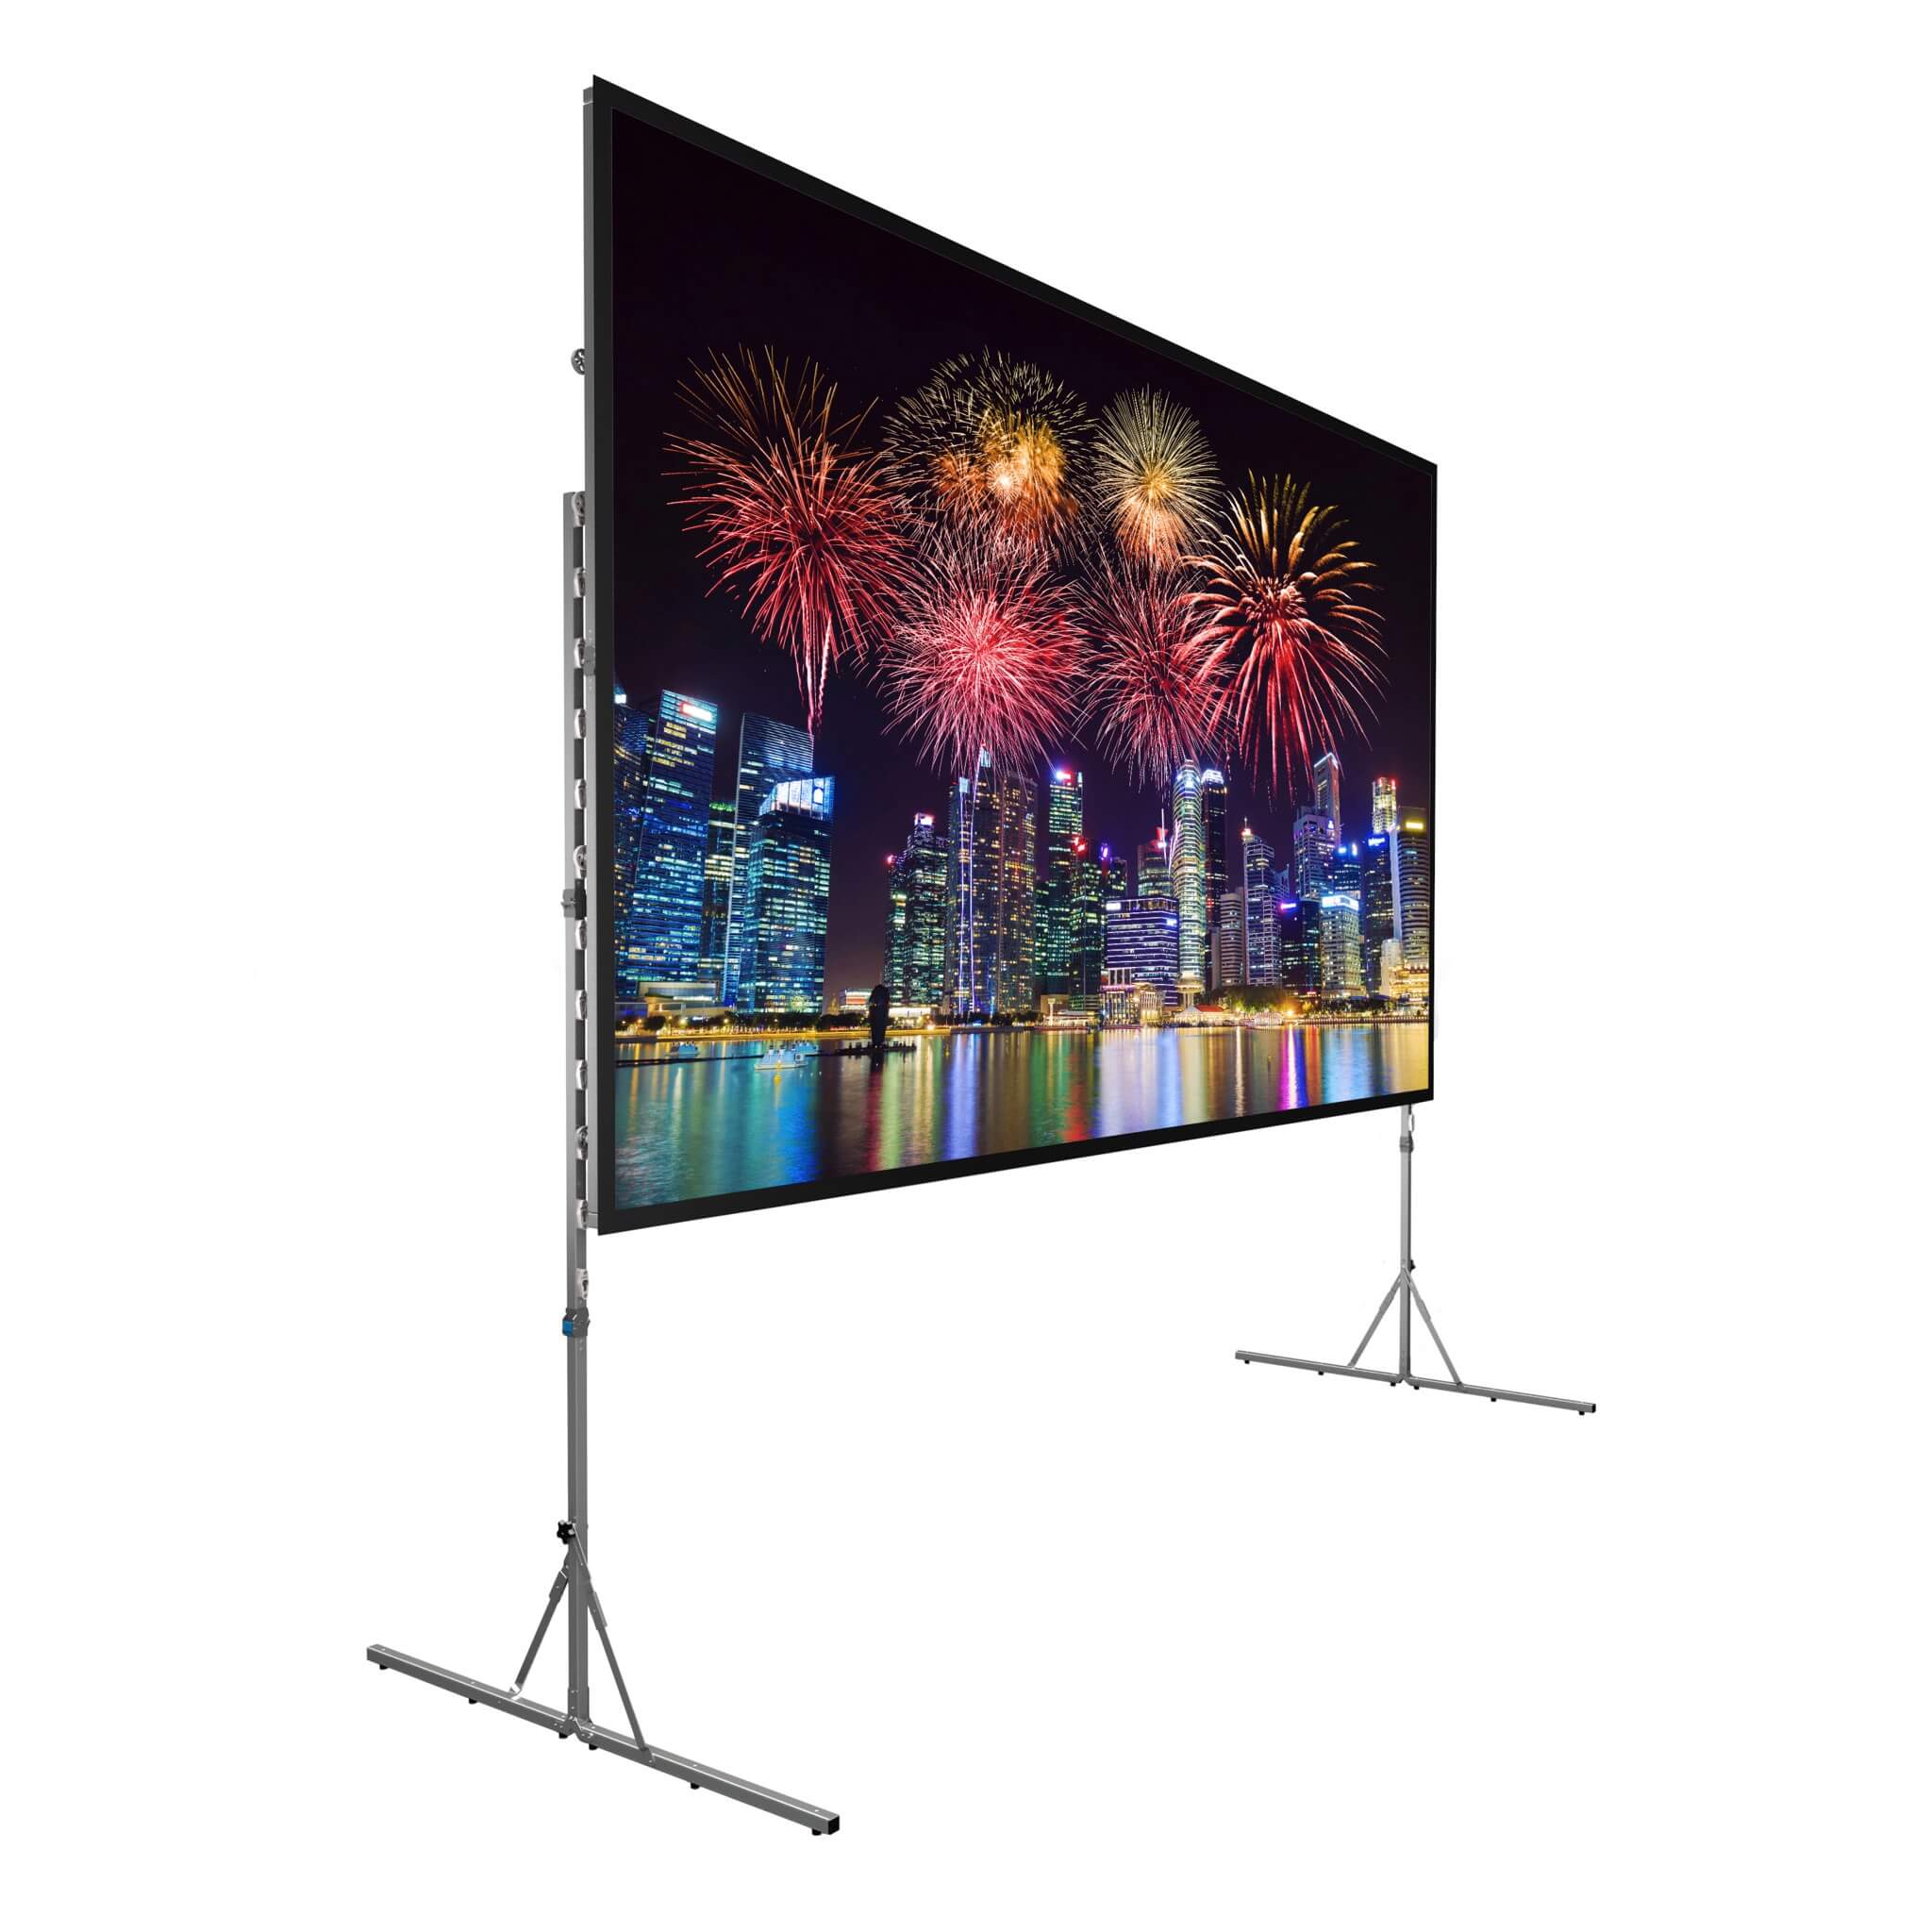 Da-Lite Fast-Fold Deluxe Screen System - Portable Folding Frame Screen, shown with projected image